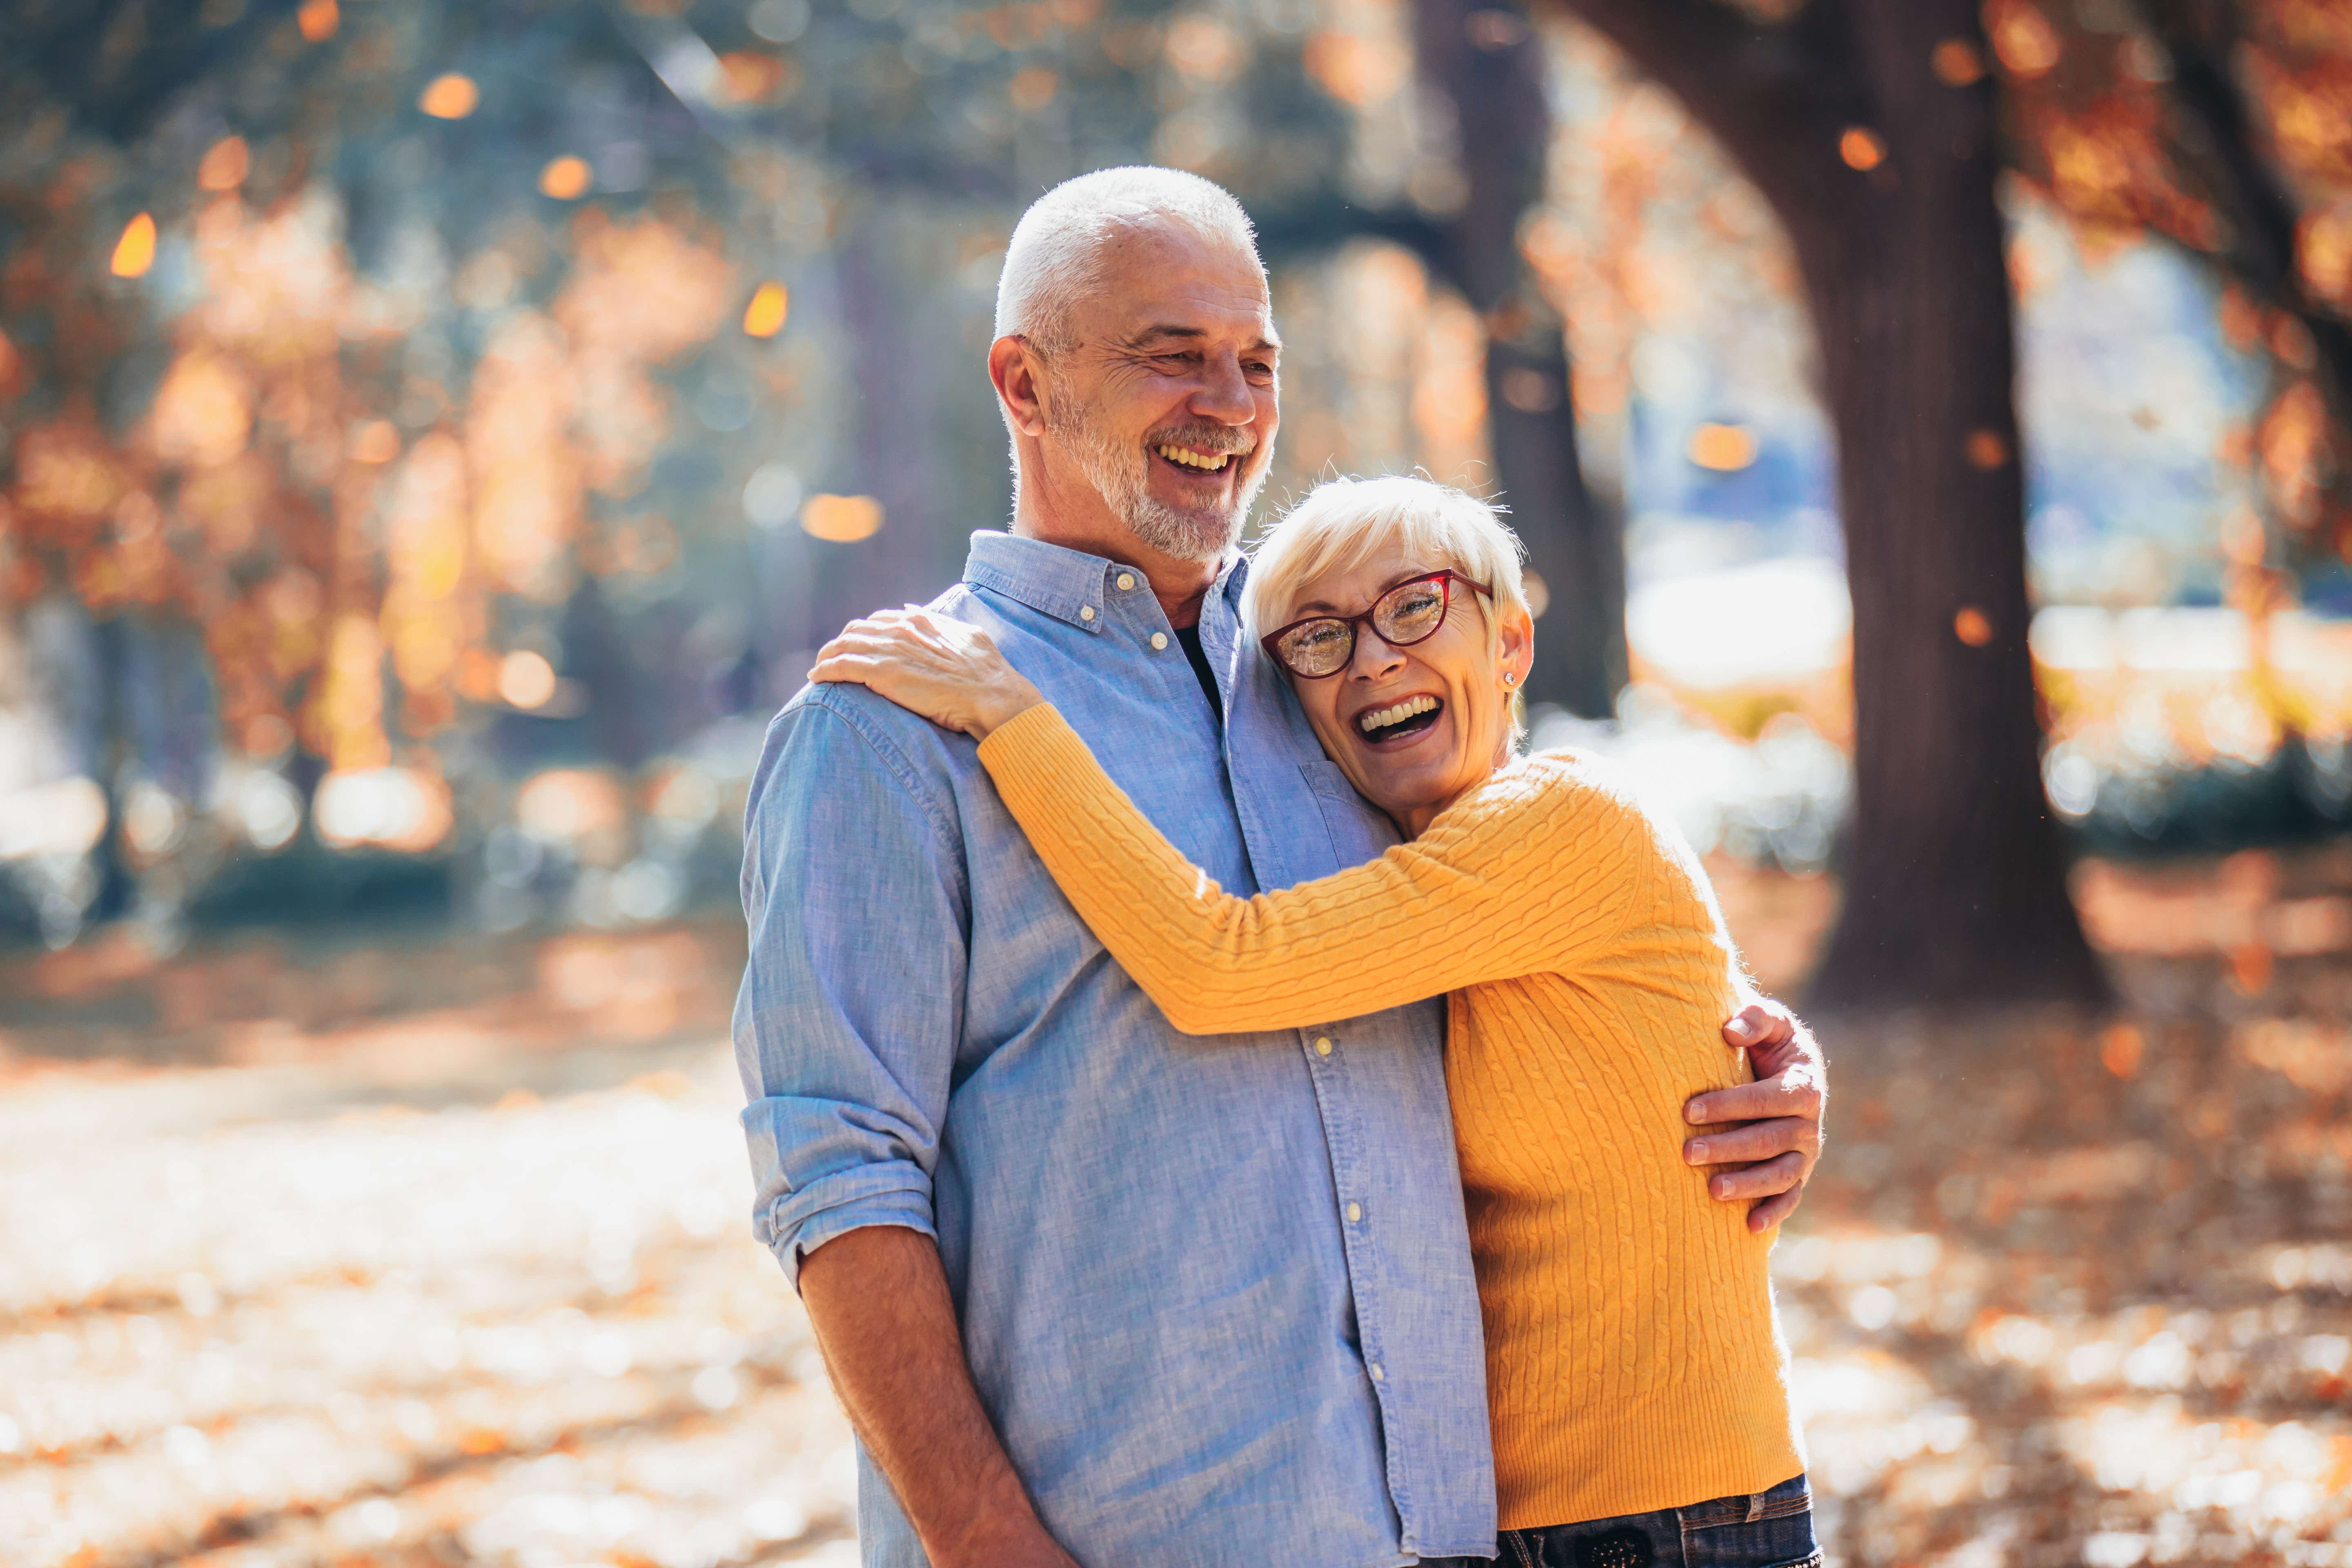 An older white male/female couple stand sideways on in front of a backdrop of autumnal trees with orange leaves falling to the ground behind them. They are laughing together